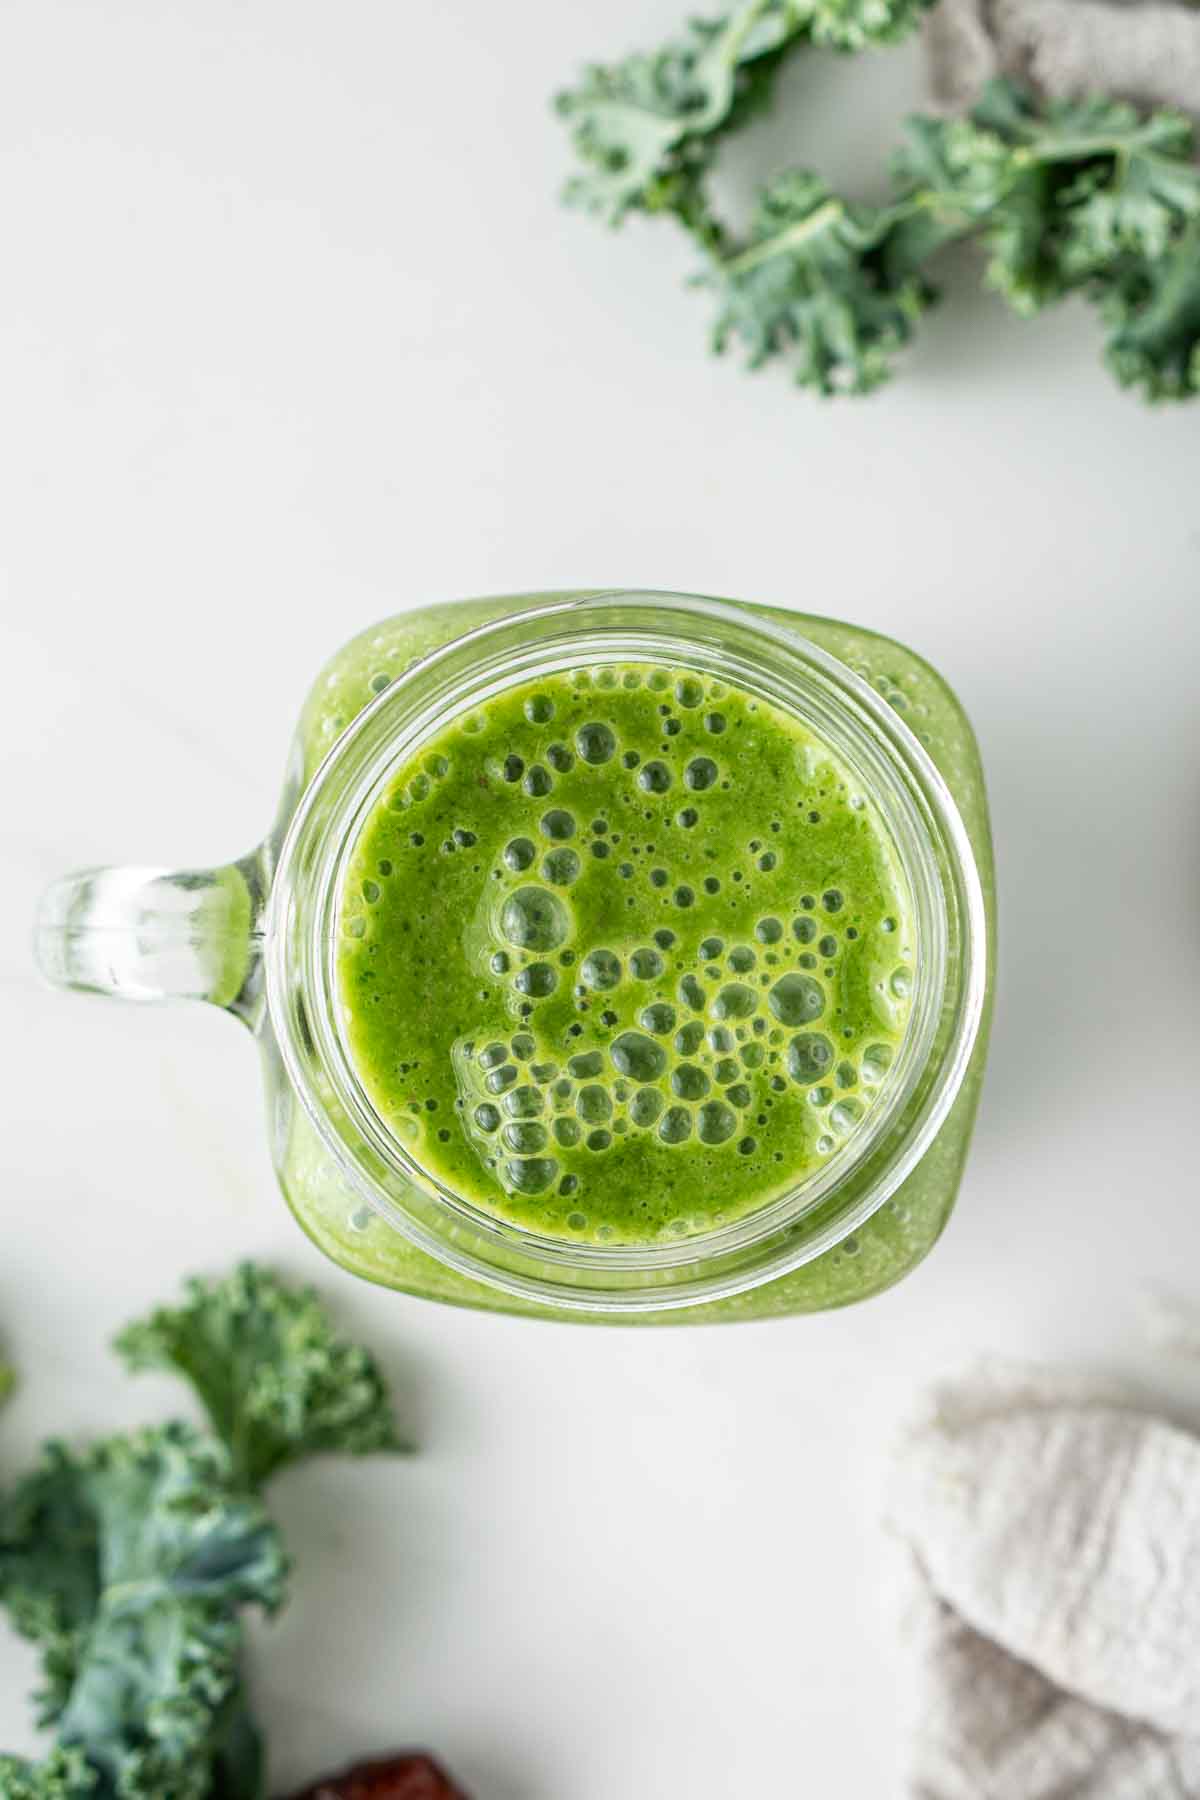 Green smoothie from the top served in a glass.